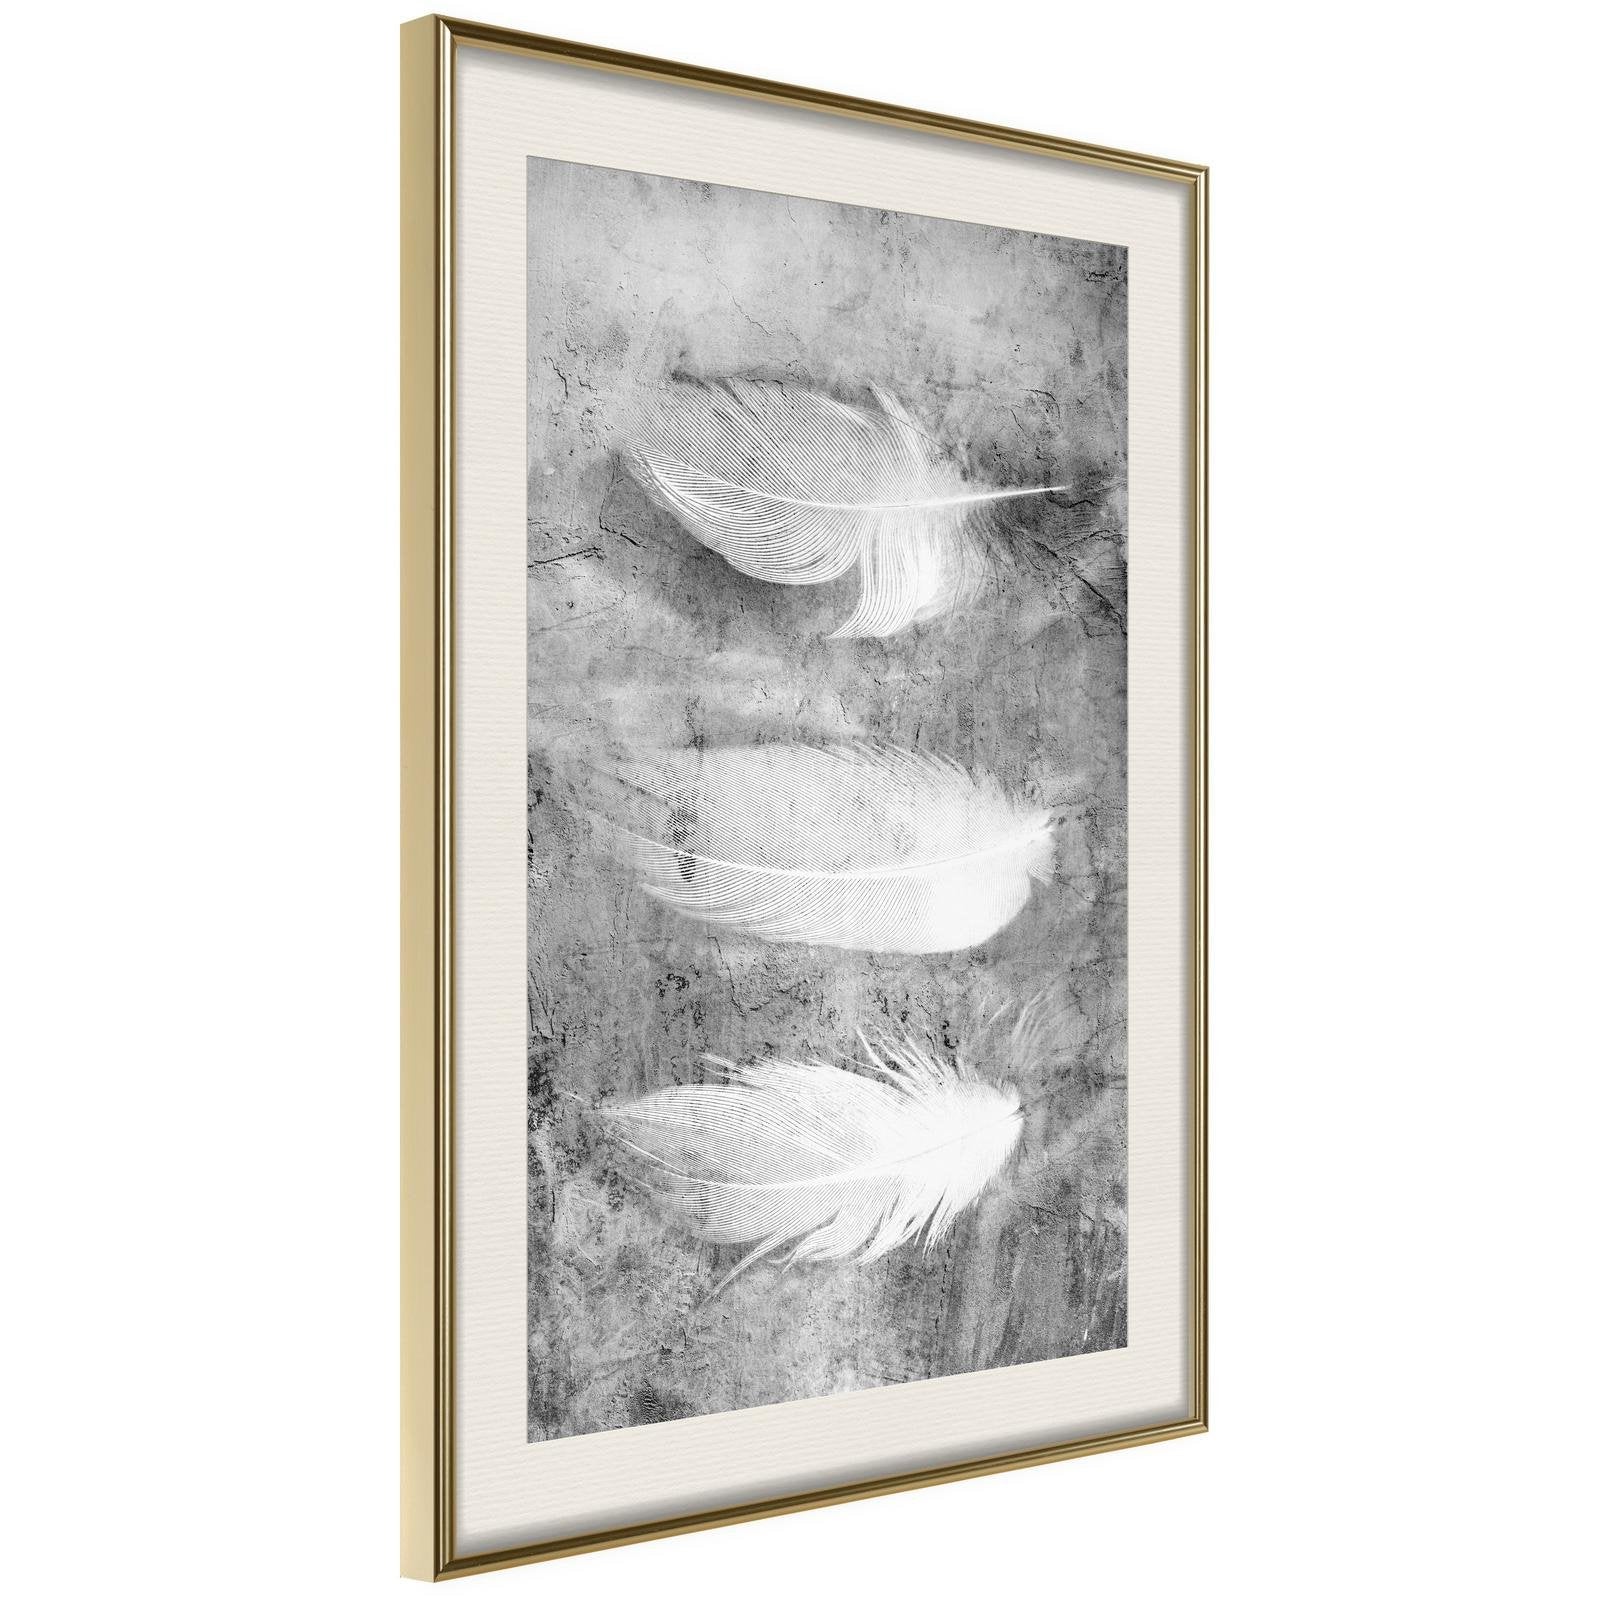 Inramad Poster / Tavla - Delicate Feathers - 20x30 Guldram med passepartout